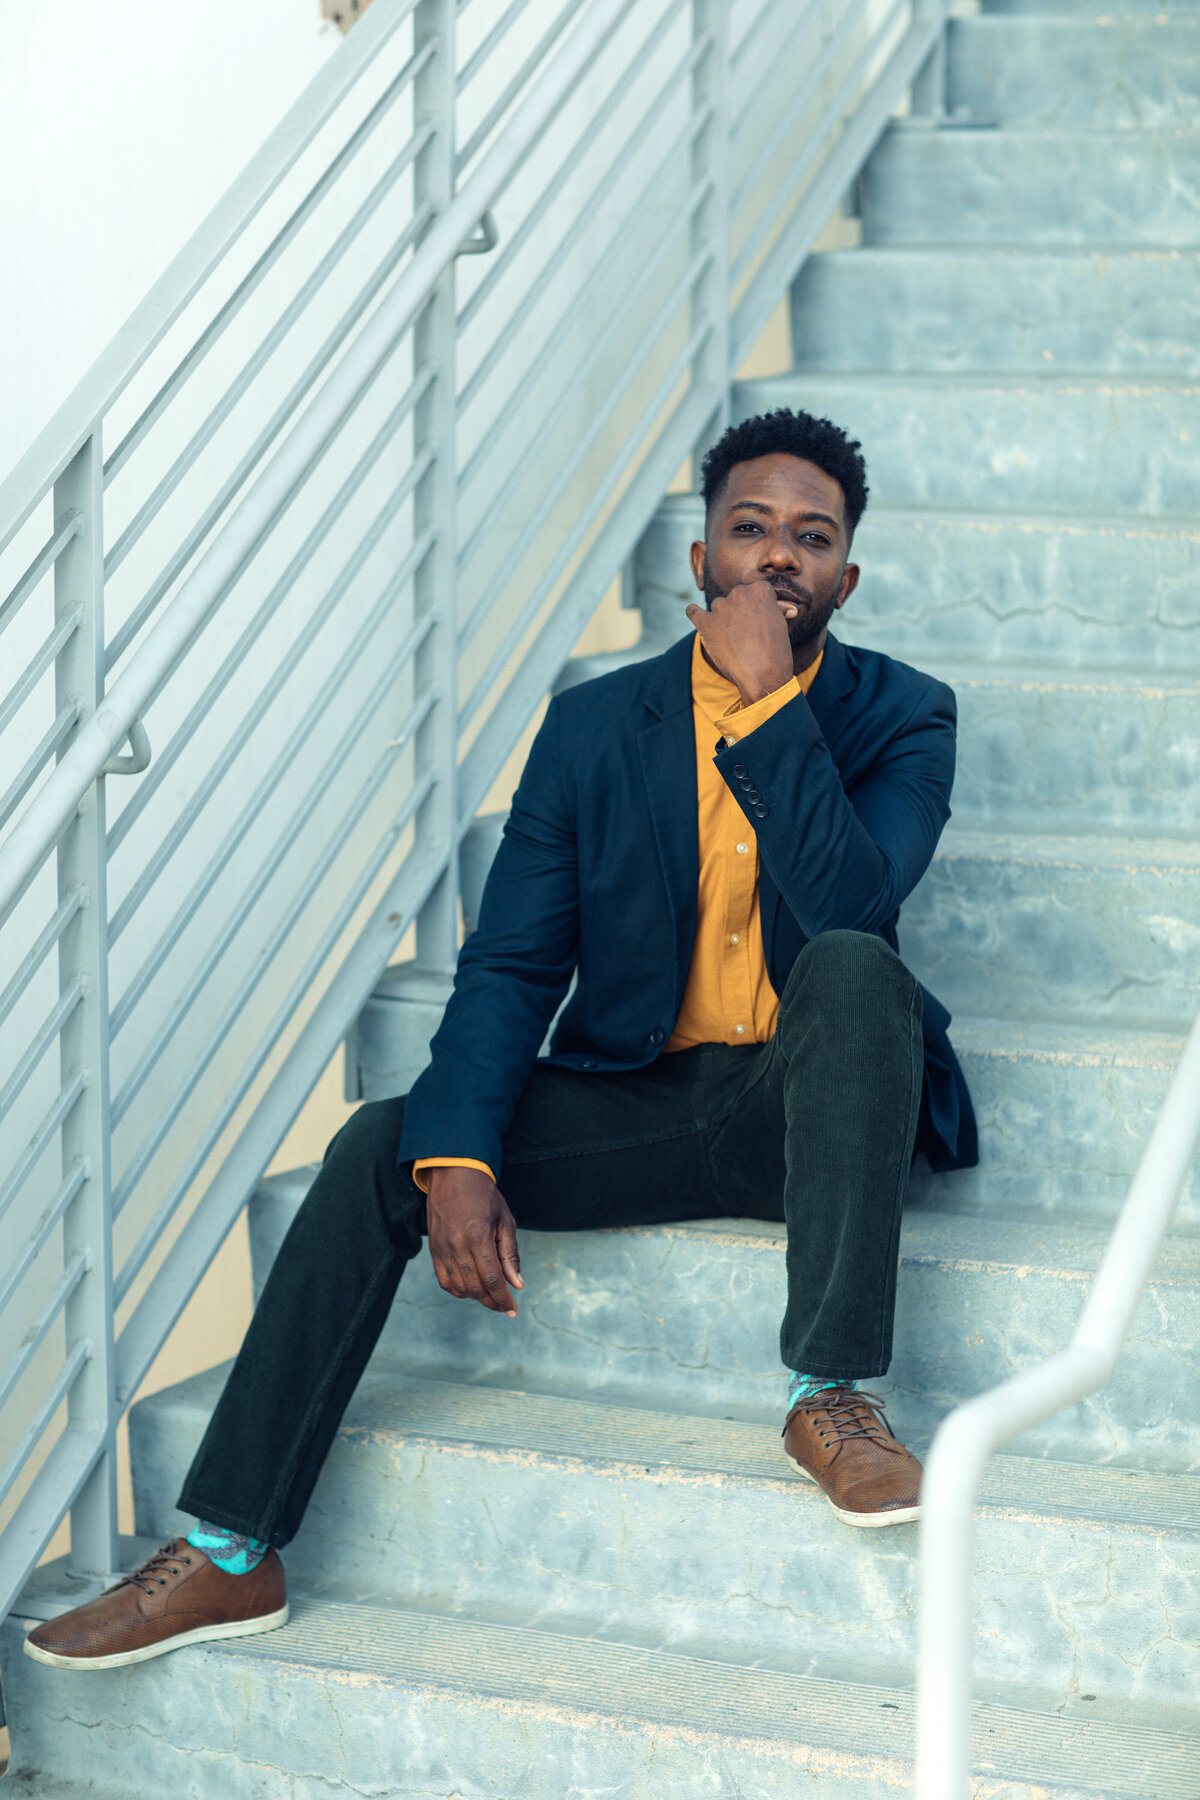 Portrait Photo Of Young Black Man Sitting On Stairs With One Hand On His Chin Los Angeles